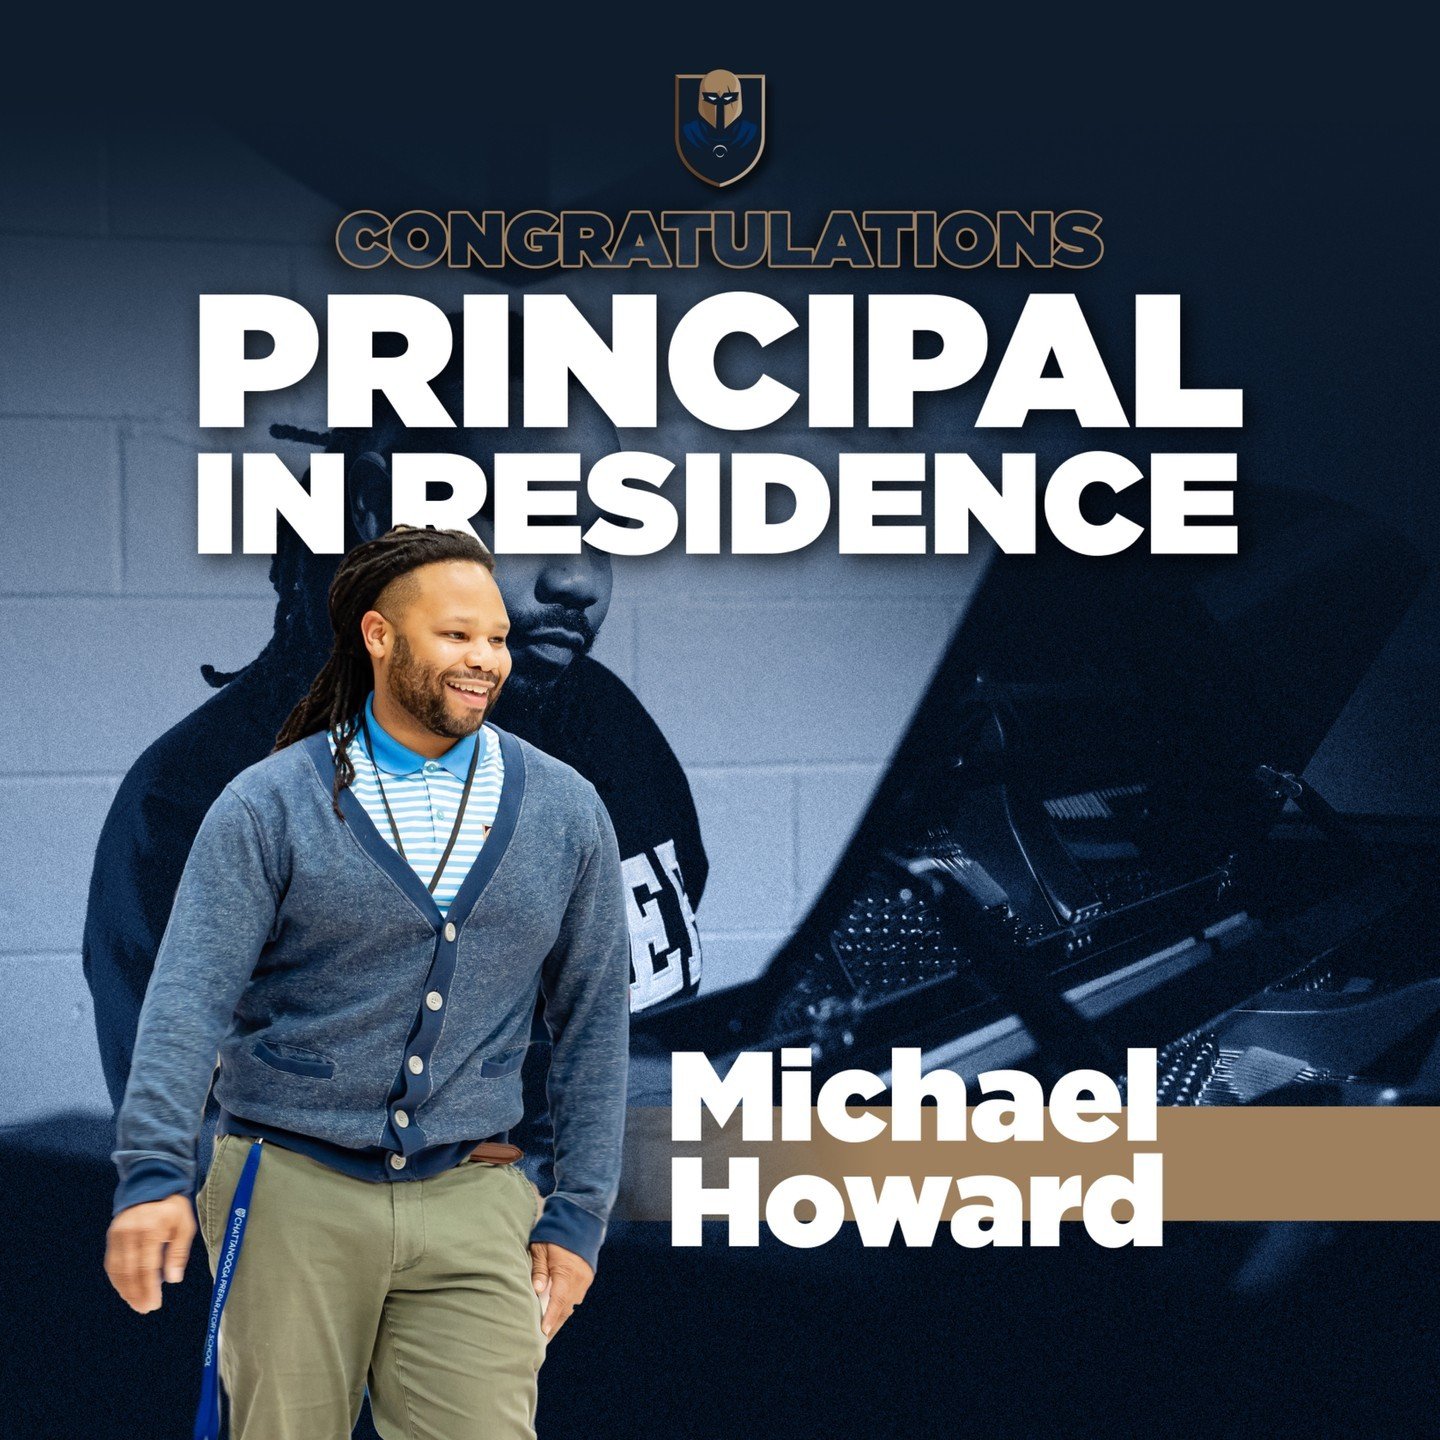 We'd like to officially announce Mr. Michael Howard as our Principal in Residence for the 2024-2025 school year!⠀
&bull;&bull;&bull;&bull;&bull;⠀
#chattprep #preppublicschools #administrator